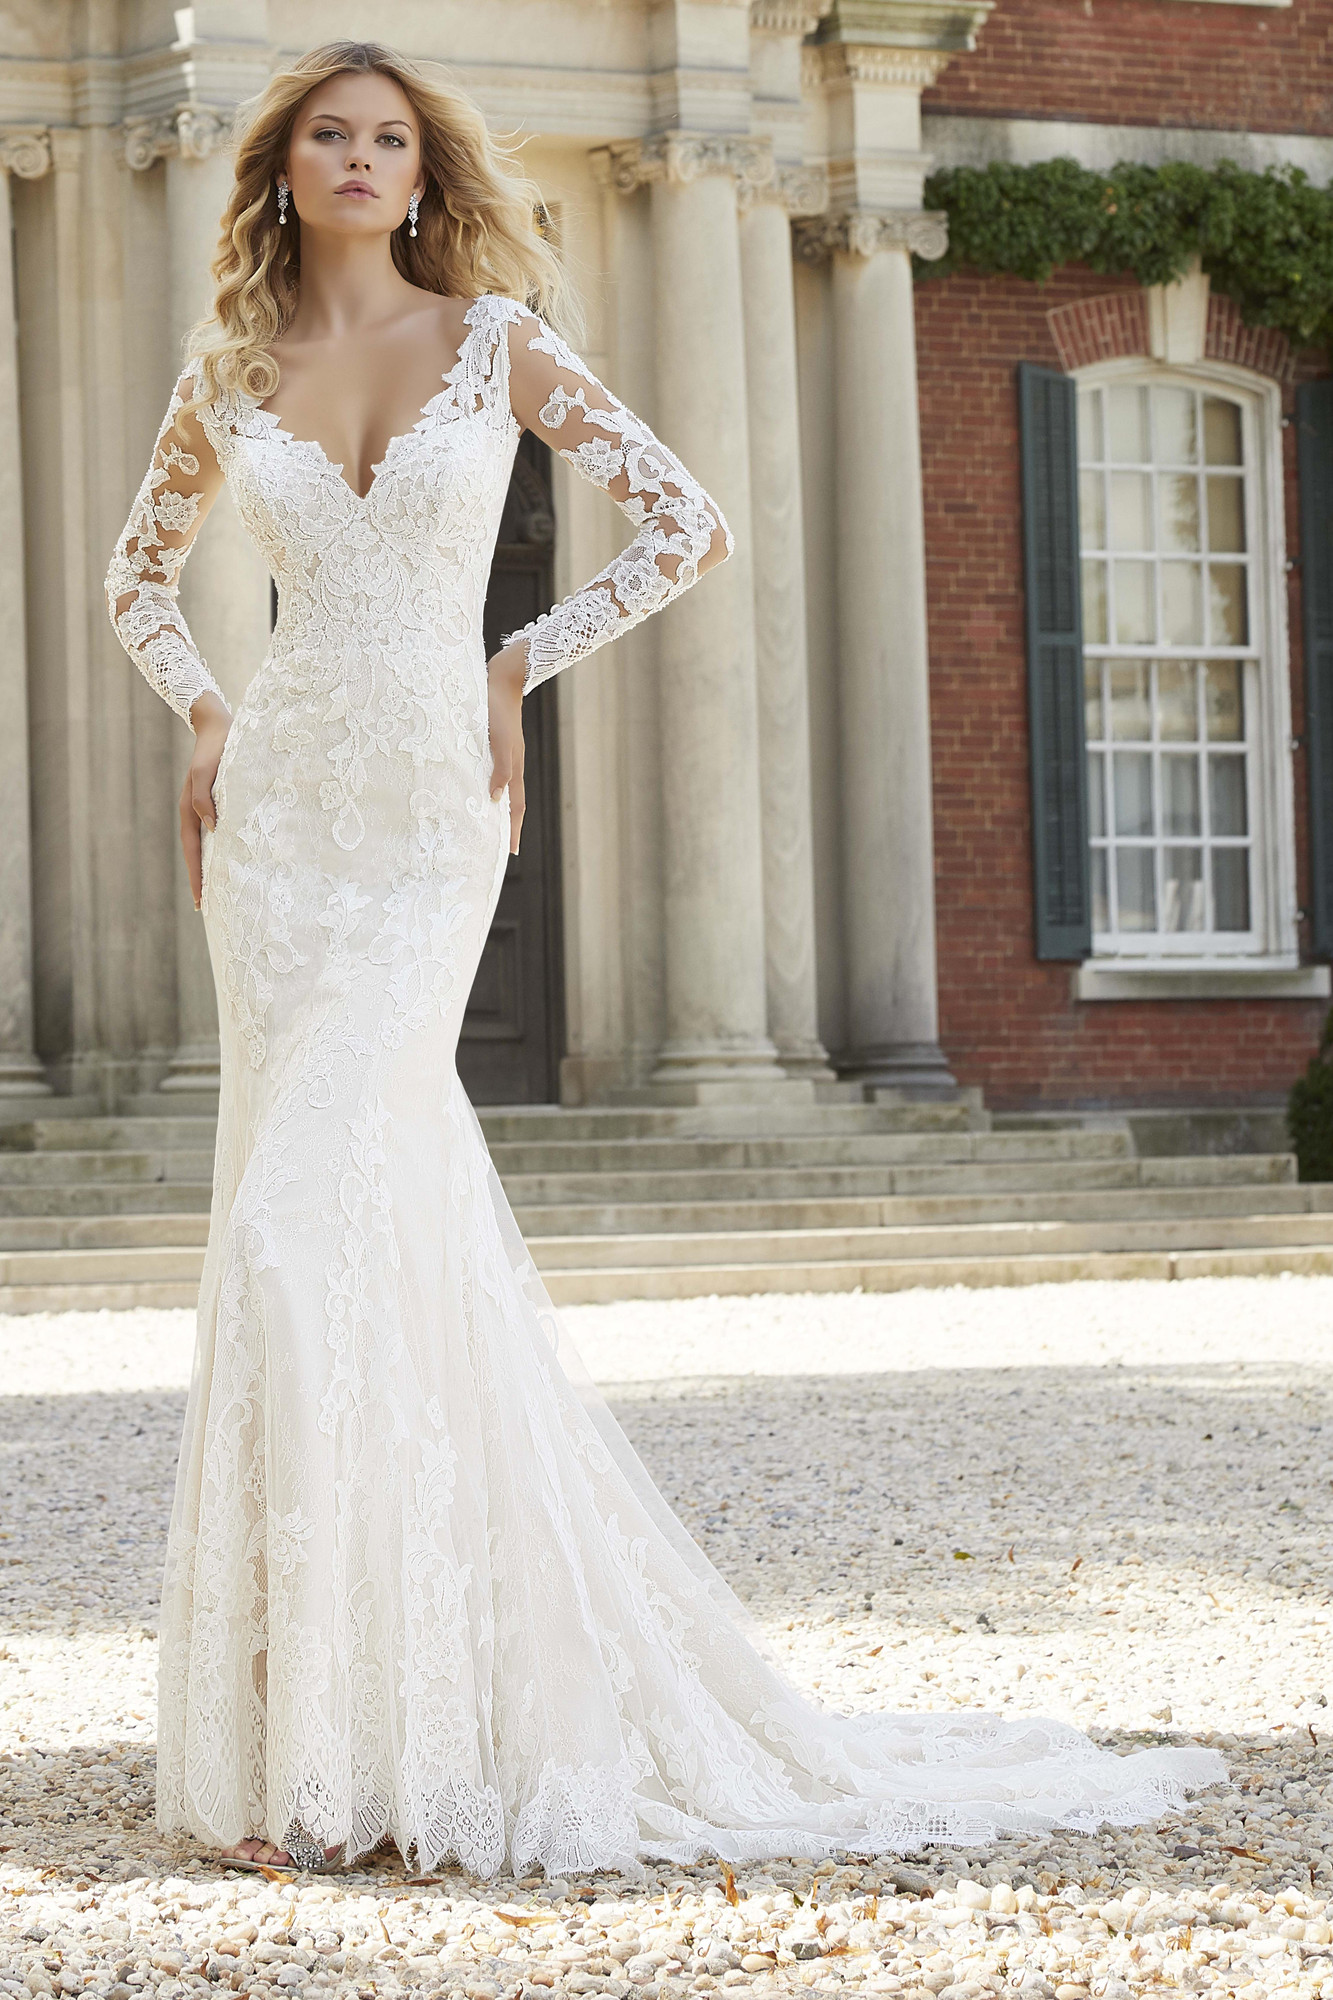 2022 Wedding Dress from Morilee - hitched.co.uk